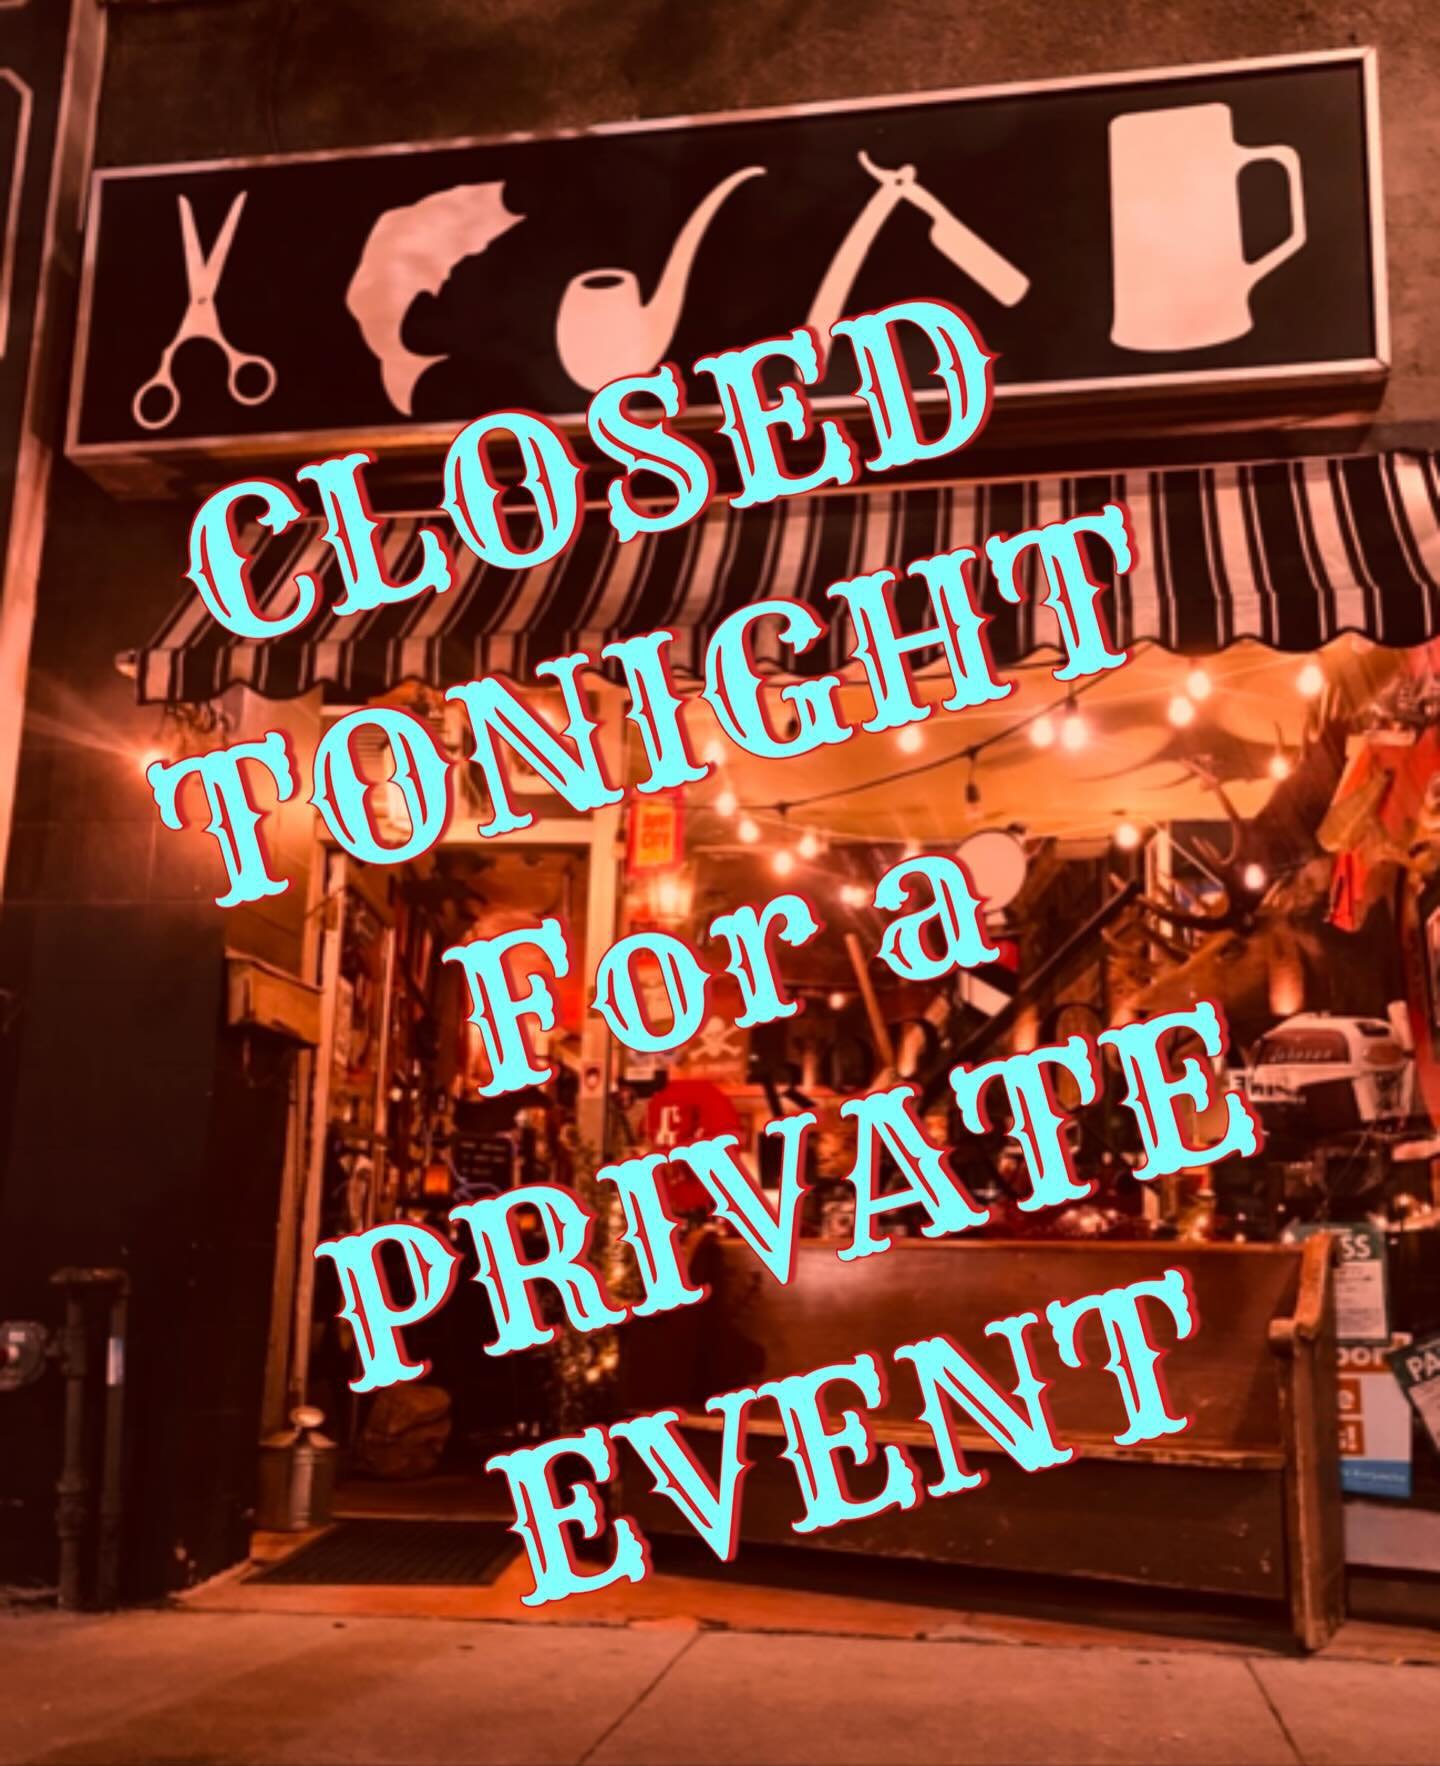 Bars closed tonight for a private event!
We&rsquo;ll see y&rsquo;all tomorrow night for our Open mic!
(Yes we do private events! Shoot us a message to inquire 😀